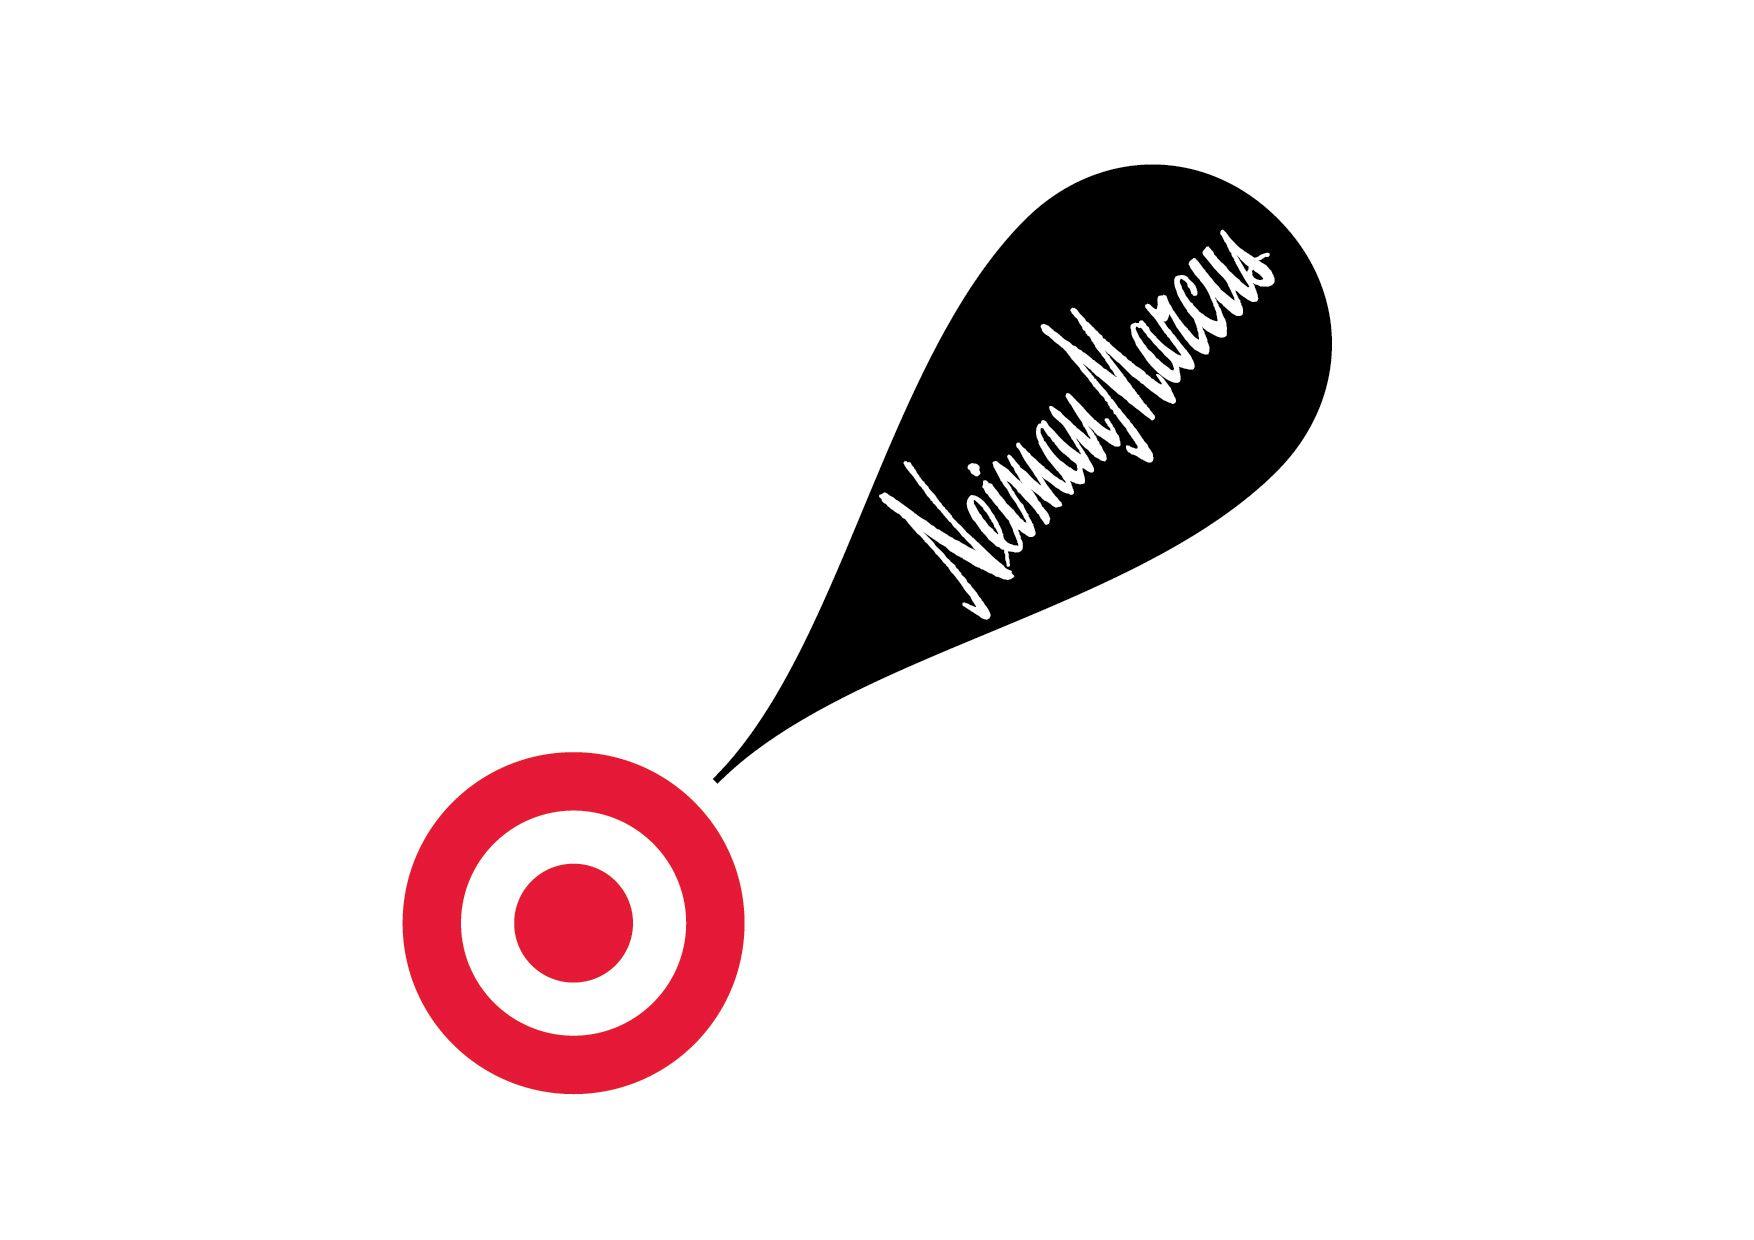 American Retail Store Logo - Target and Neiman Marcus Join Forces on Unprecedented Holiday Collection